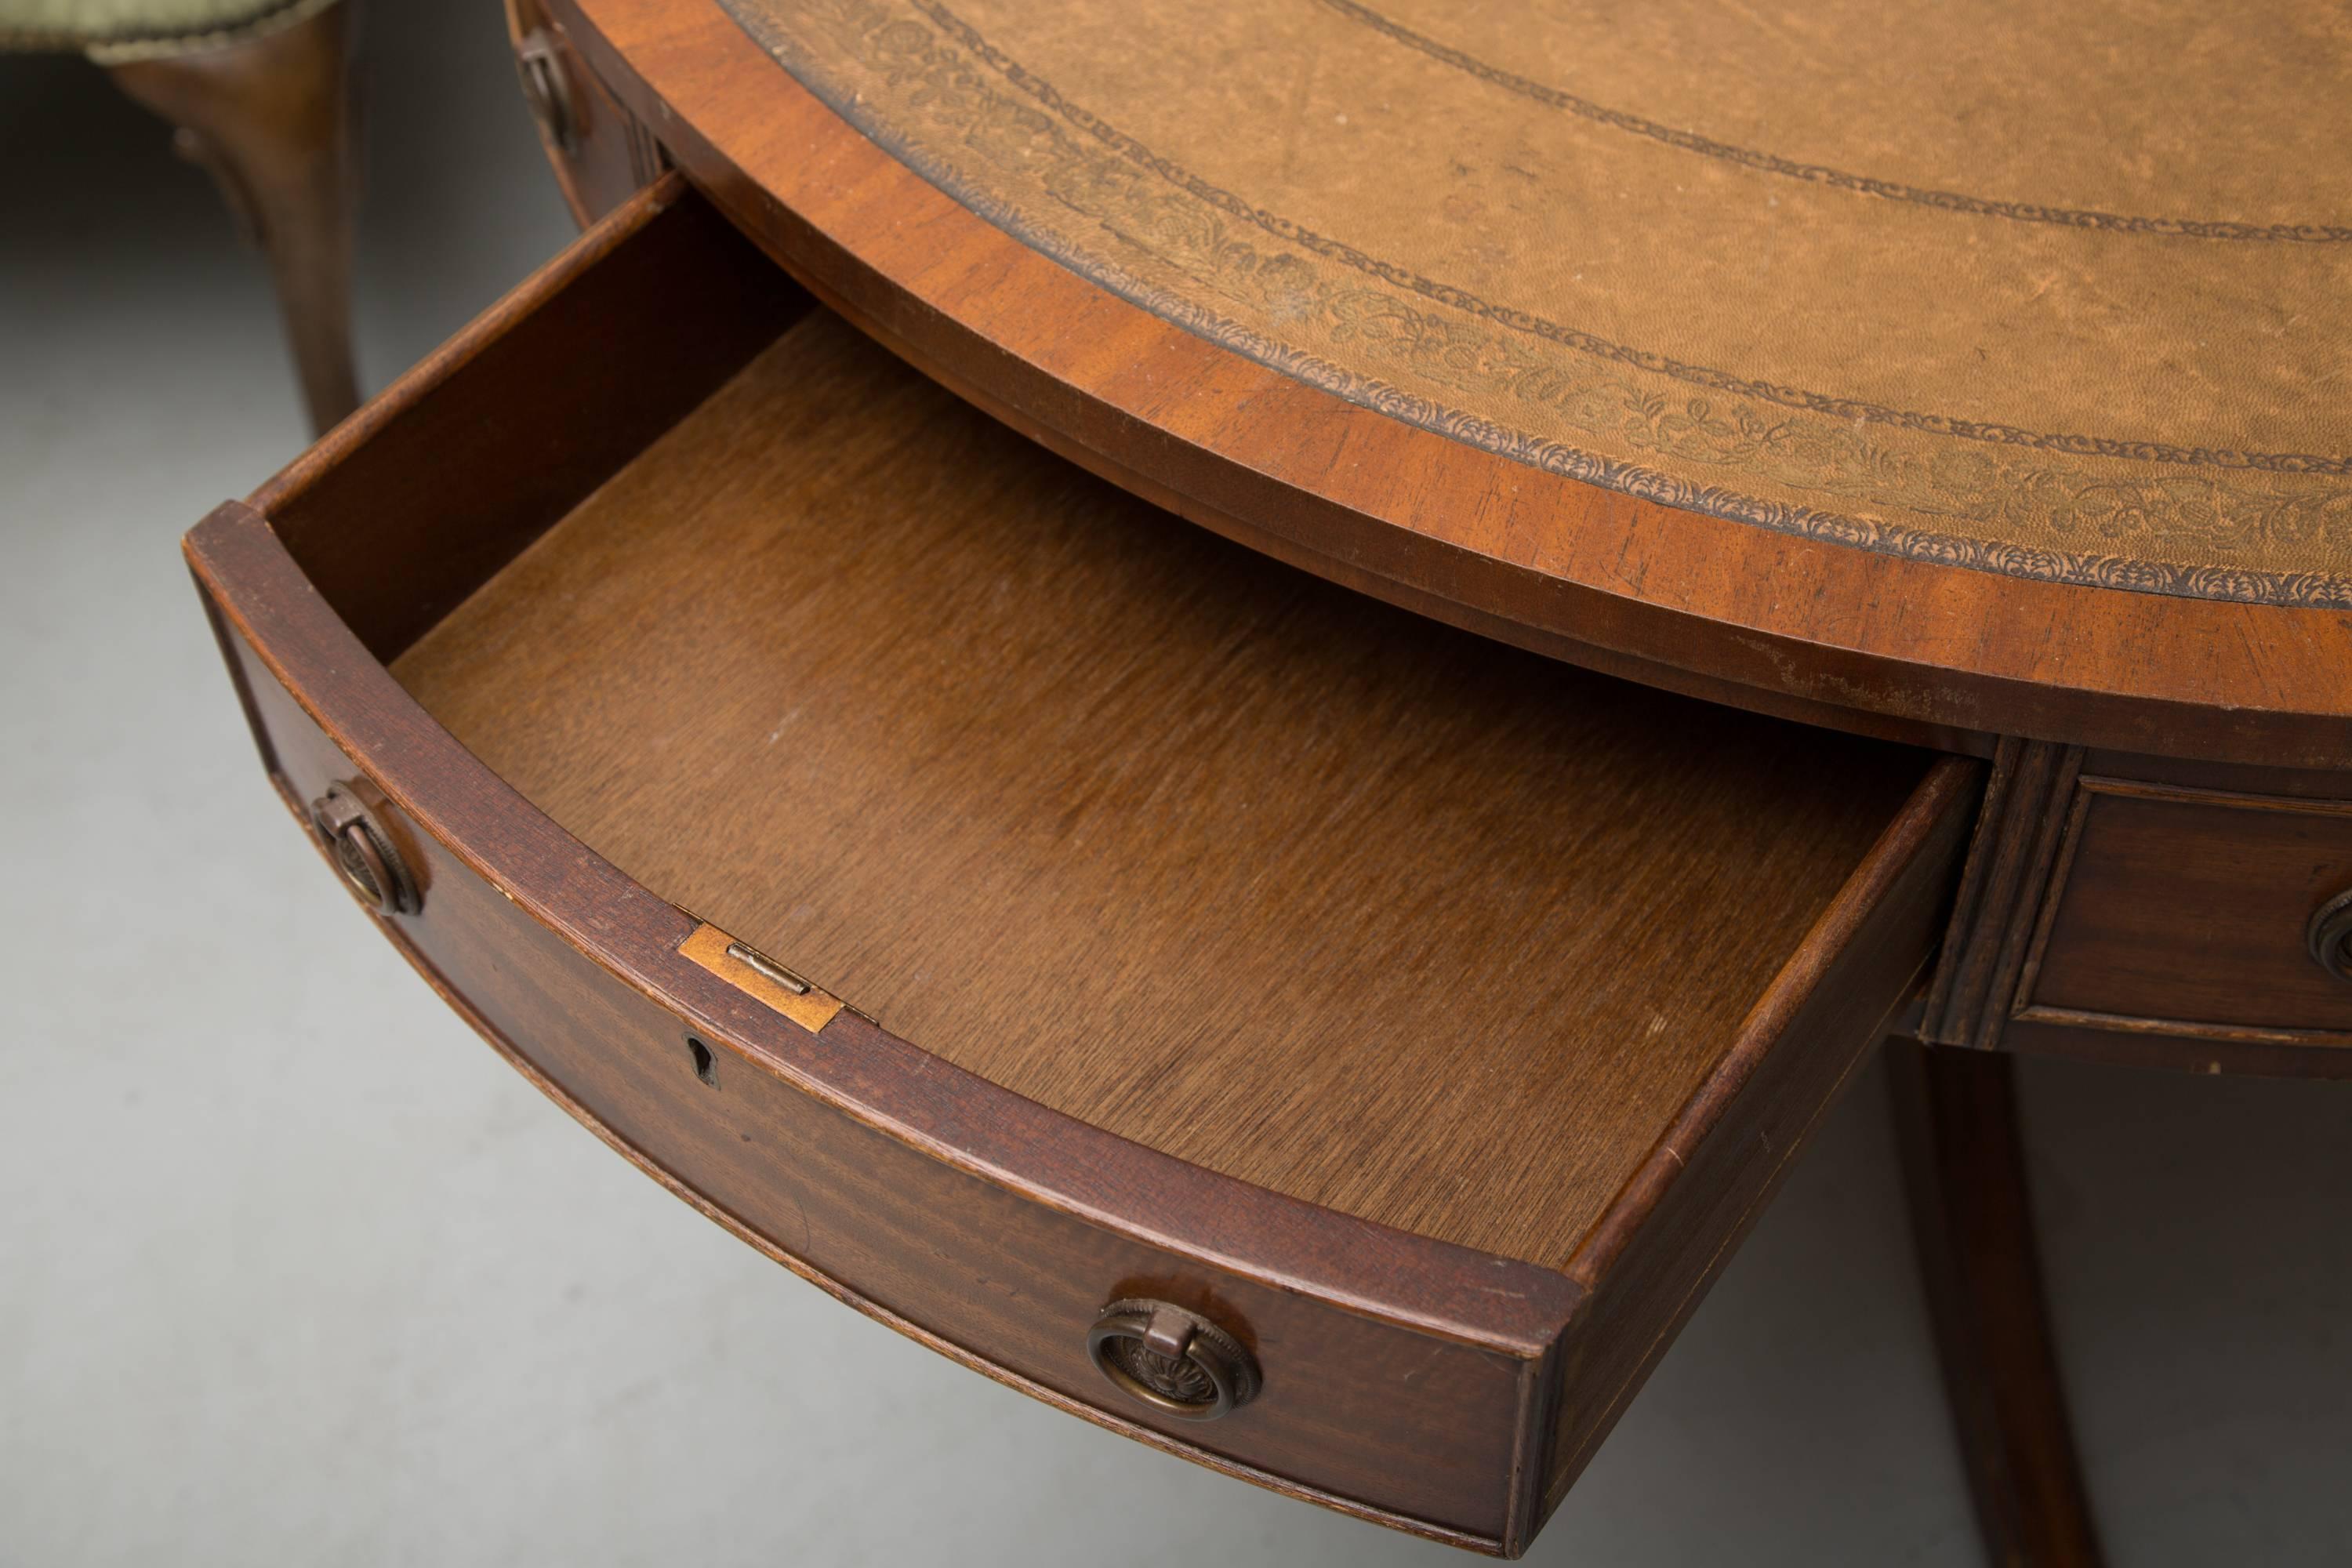 This 20th century mahogany bench-made circular drum table has a tanleather inset with gilt tooling framed by mahogany crossbanding. The wide frieze has a combination of faux and functional drawers accented with Fine beading. The circular structure